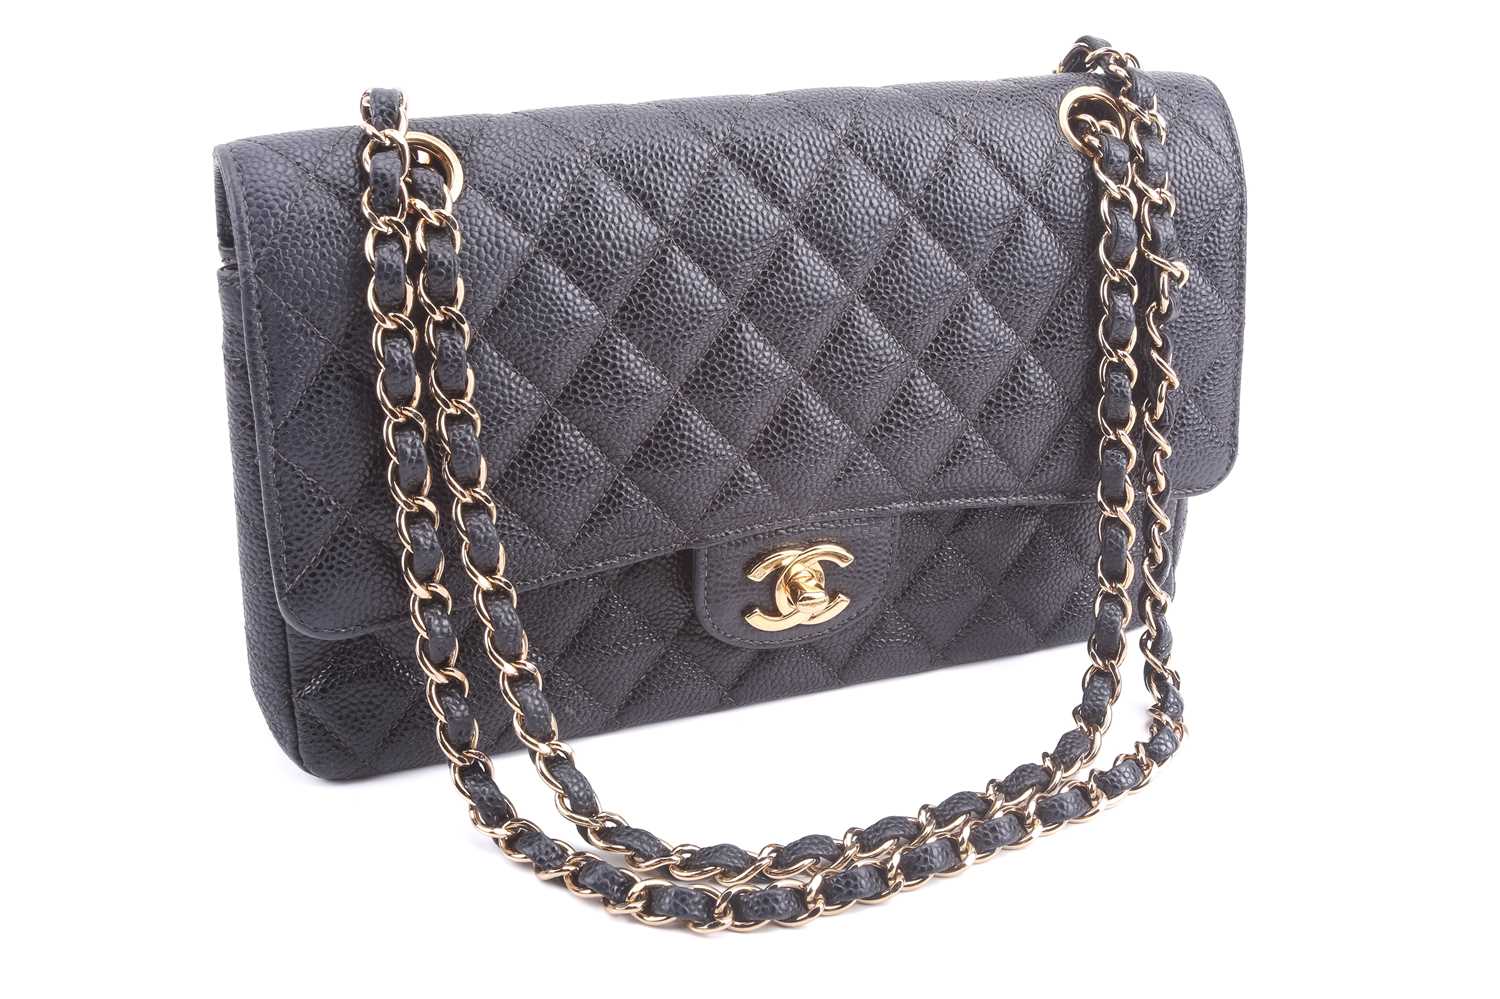 Lot 40 - Chanel - a medium classic double flap bag in